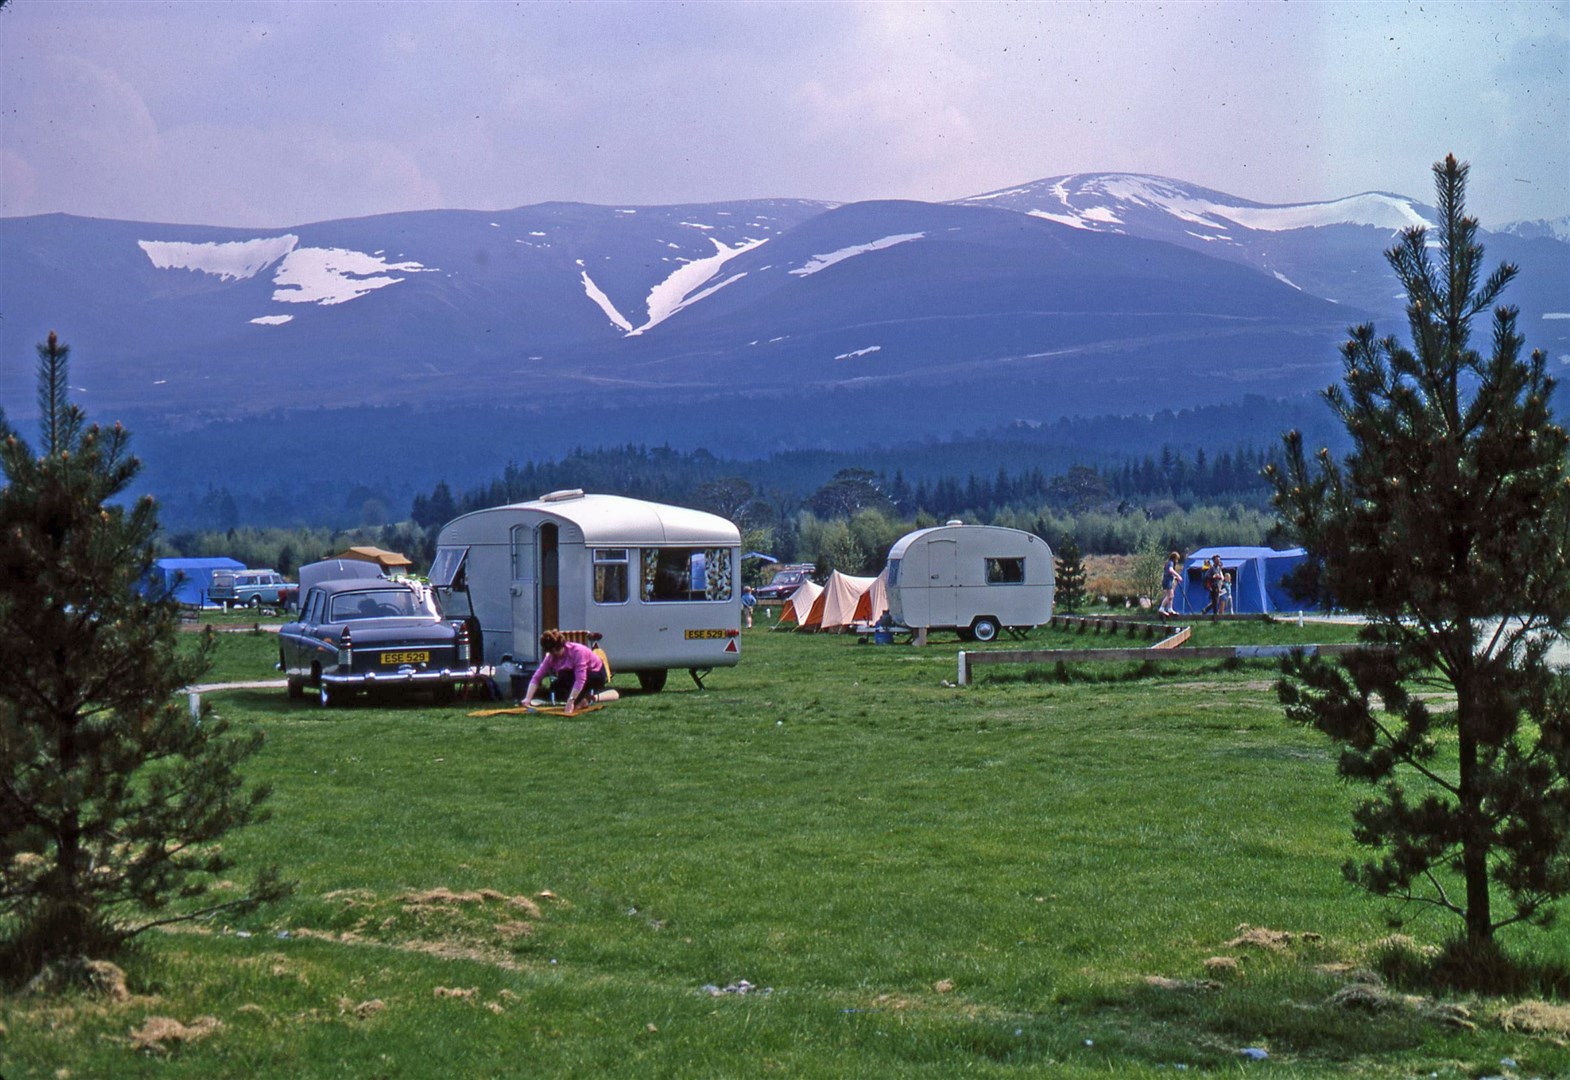 Carry on camping... in the mid 1970s.